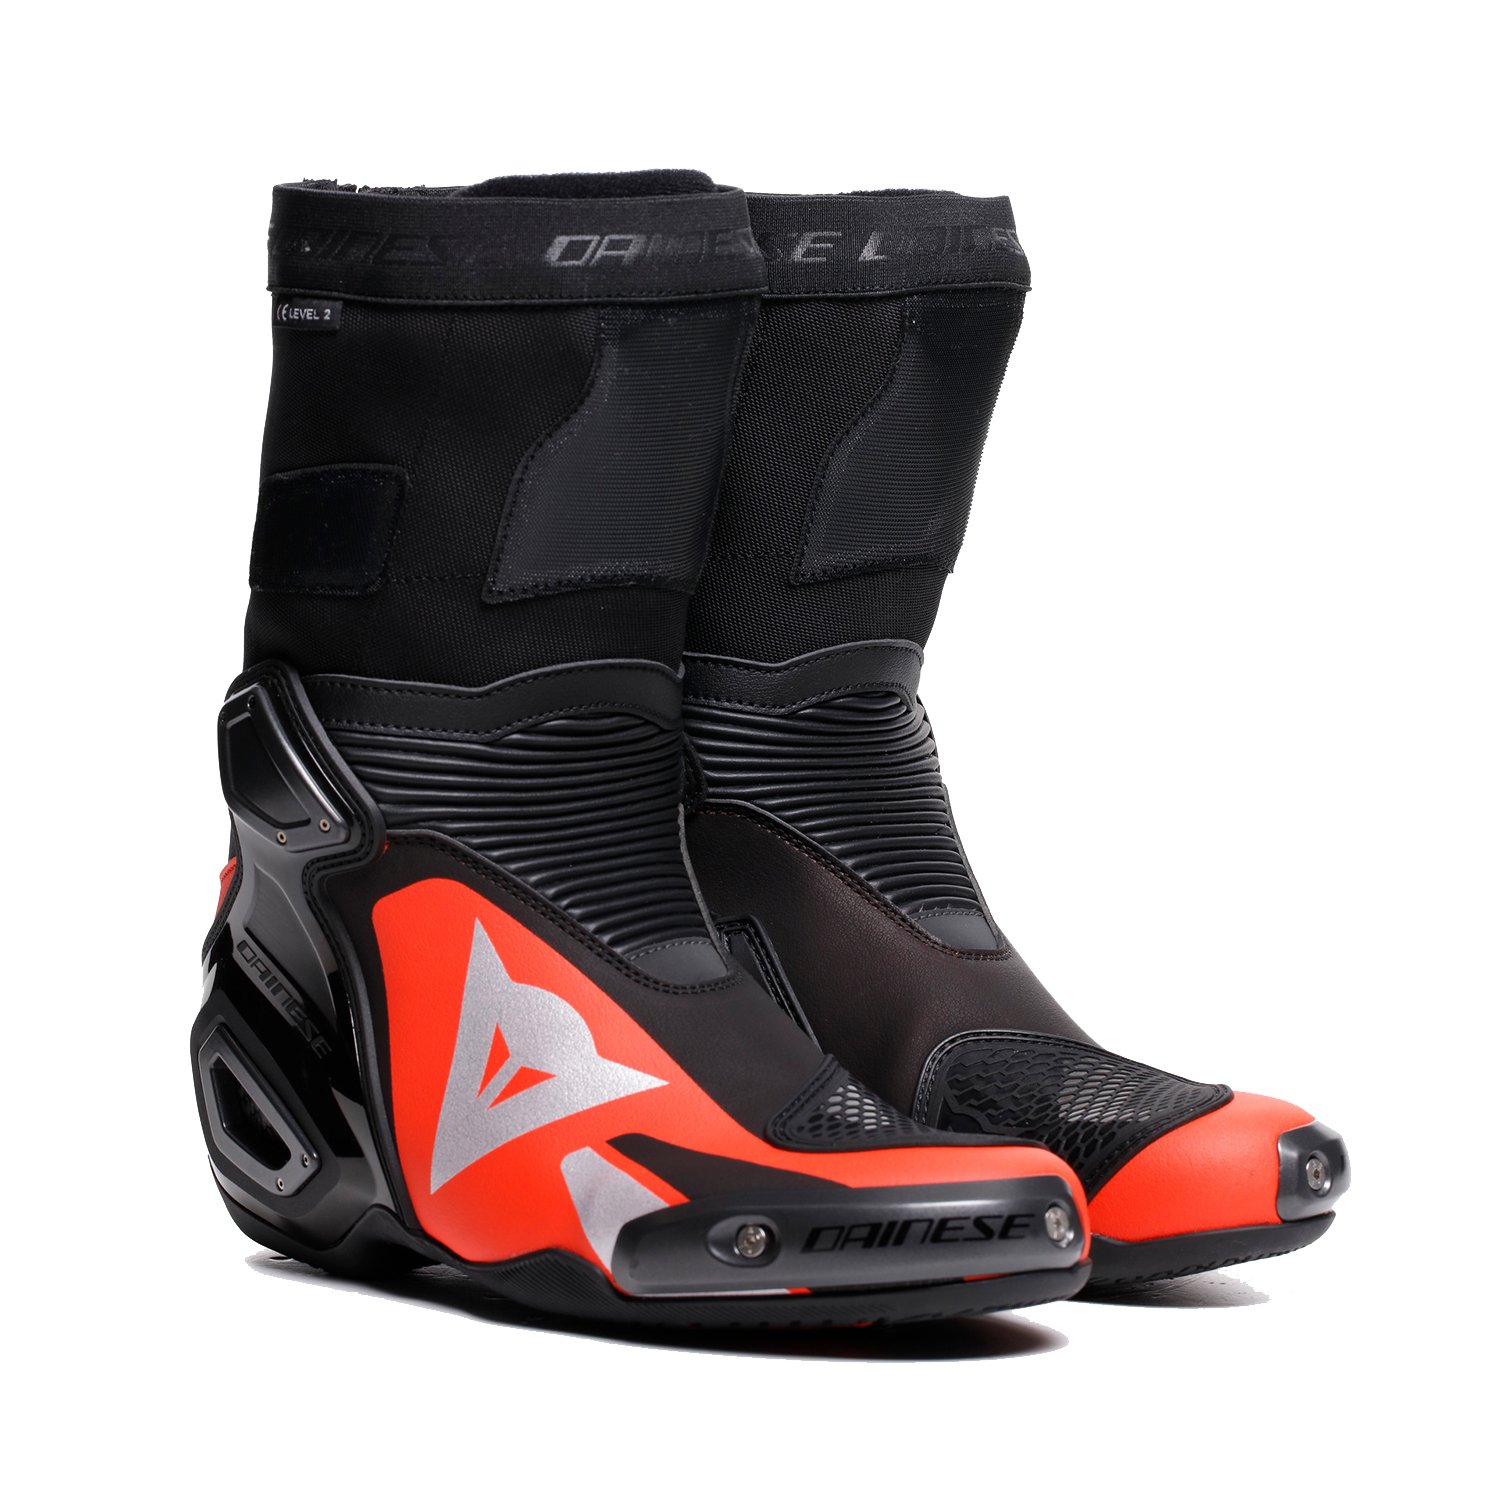 Image of Dainese Axial 2 Boots Black Red Fluo Size 42 EN